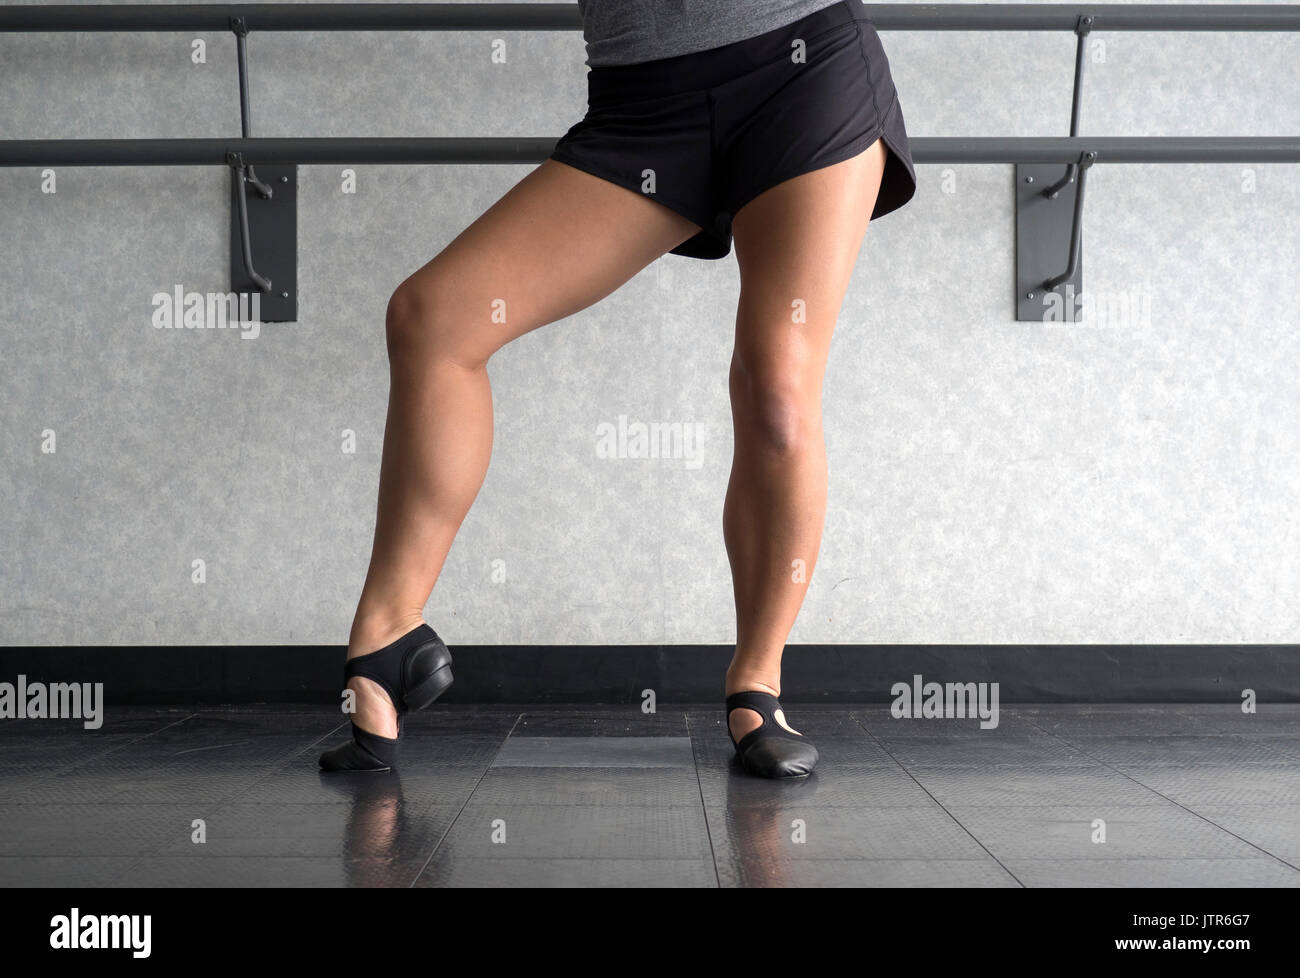 Posing in Jazz shoes at the barre in dance class Stock Photo